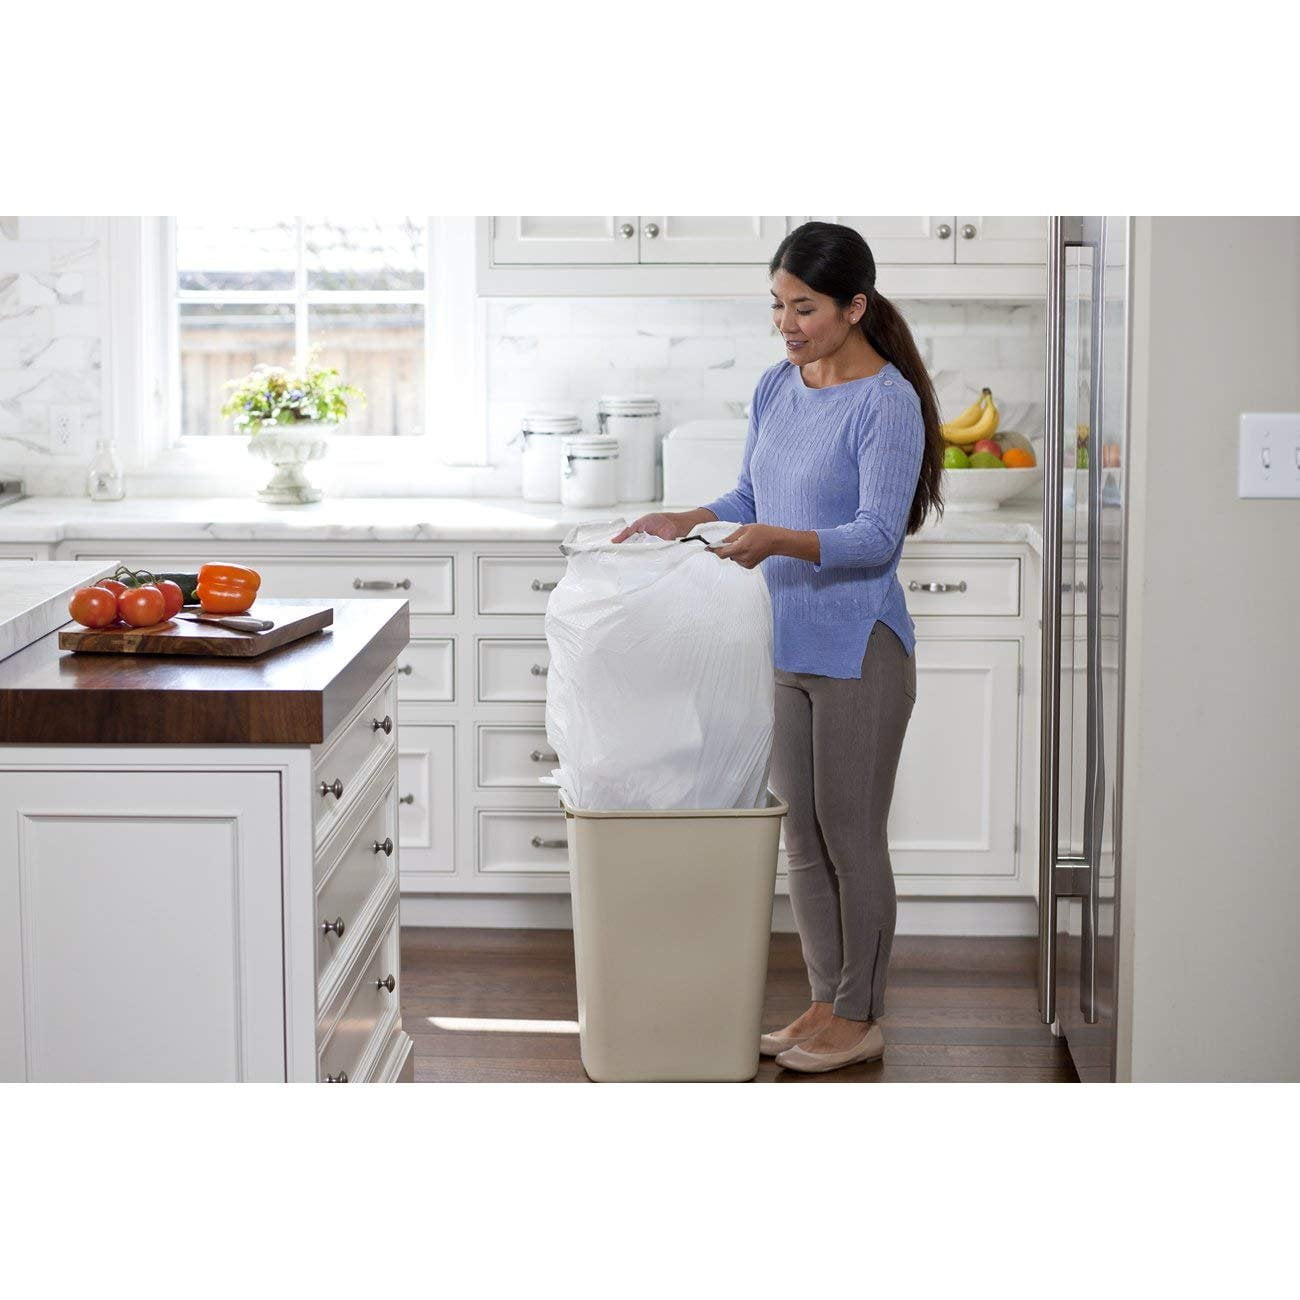 Glad Tall Kitchen 5 Day OdorShield Trash Bags With Febreze Freshness 13  Gallons Mediterranean Lavender Scent White Pack Of 80 - Office Depot